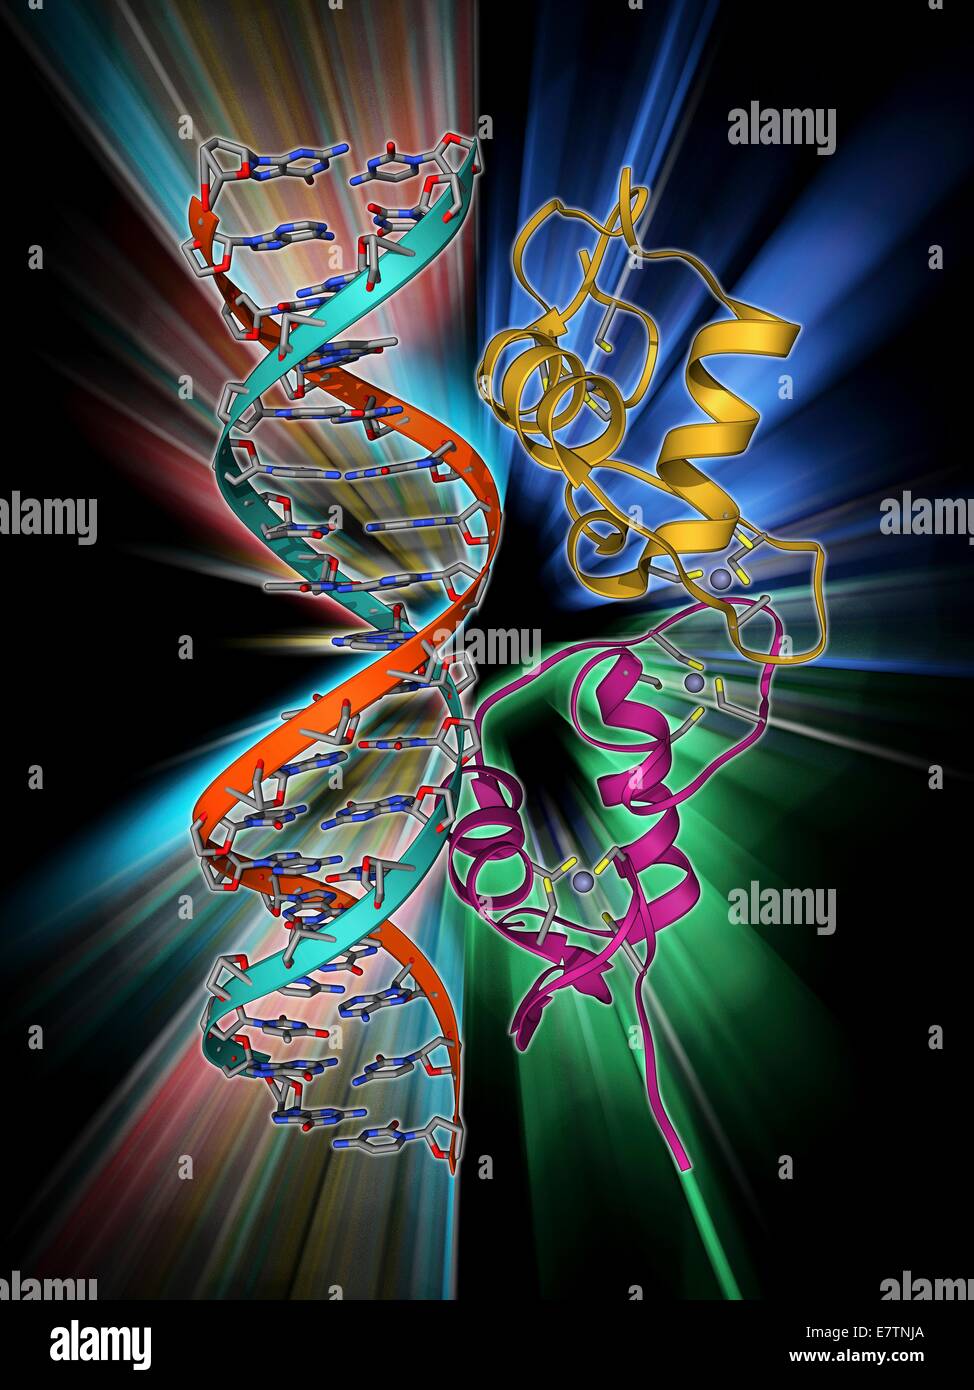 Androgen receptor. Molecular model of the DNA-binding region of an androgen receptor (pink and yellow) complexed with DNA (deoxyribonucleic acid, blue and red). Androgen receptors are nuclear receptors that are activated by binding of either of the androg Stock Photo